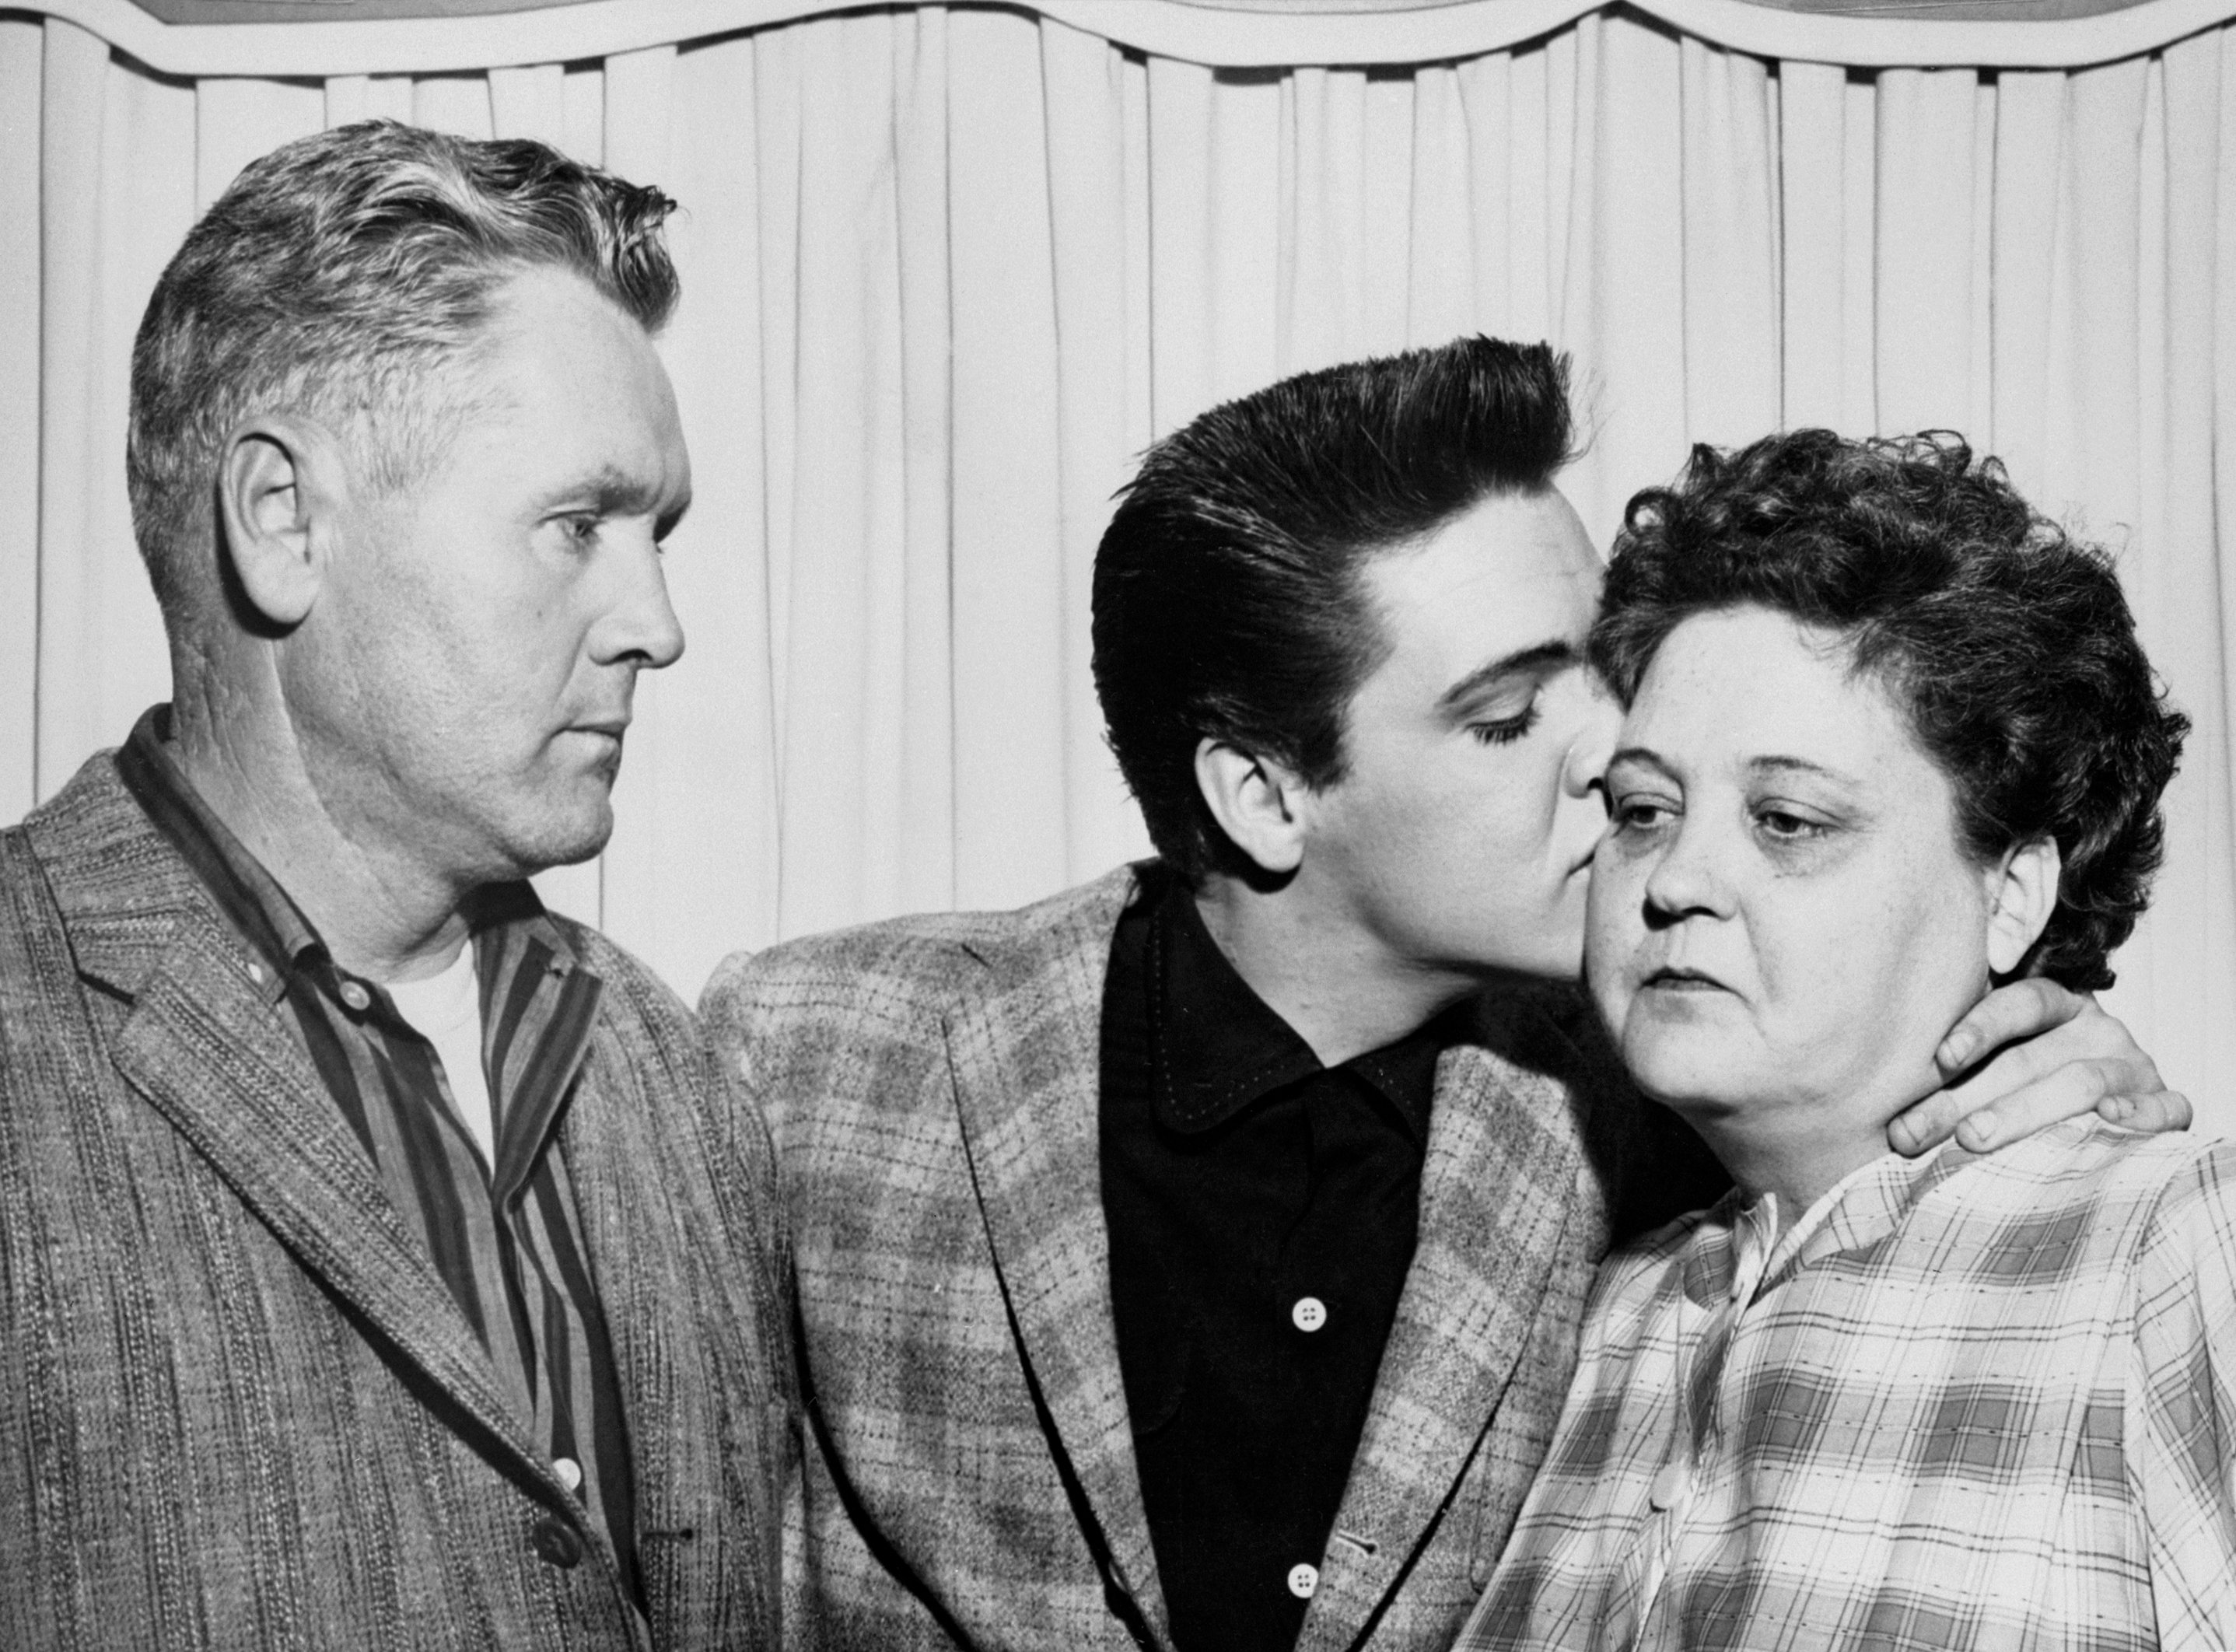 Elvis Presley's father, Vernon Presley, looks on as Elvis kisses his mother, Gladys